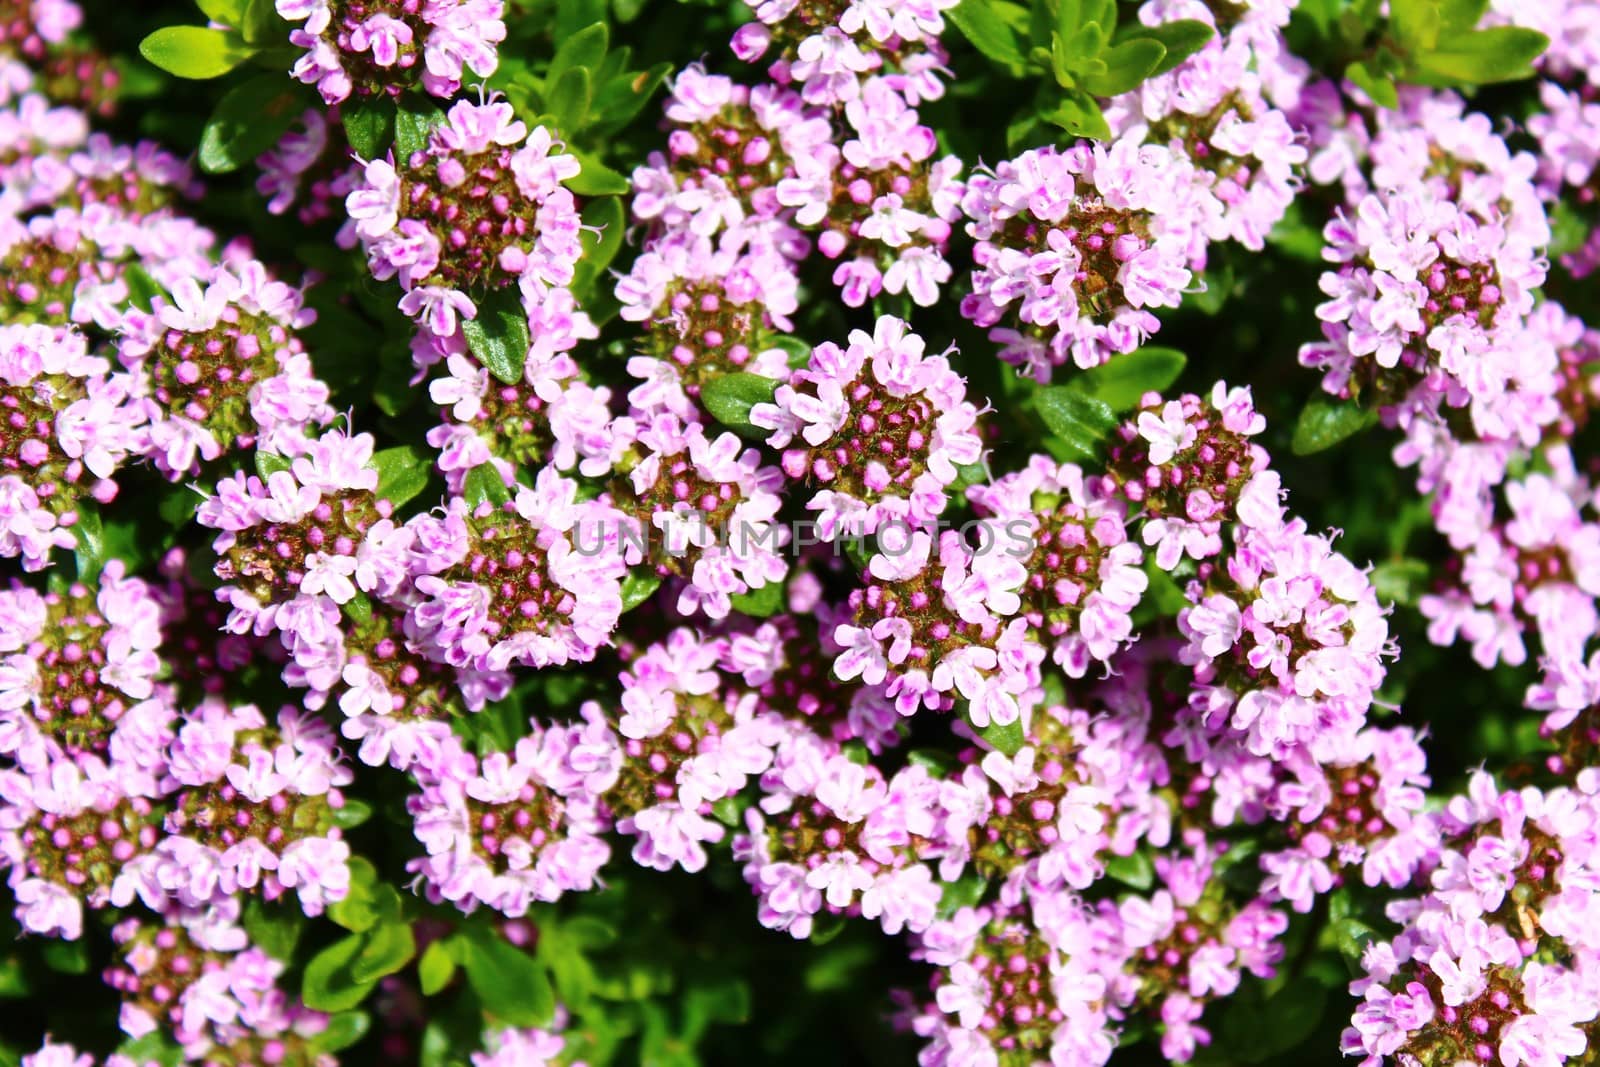 The picture shows blossoming thyme in the garden